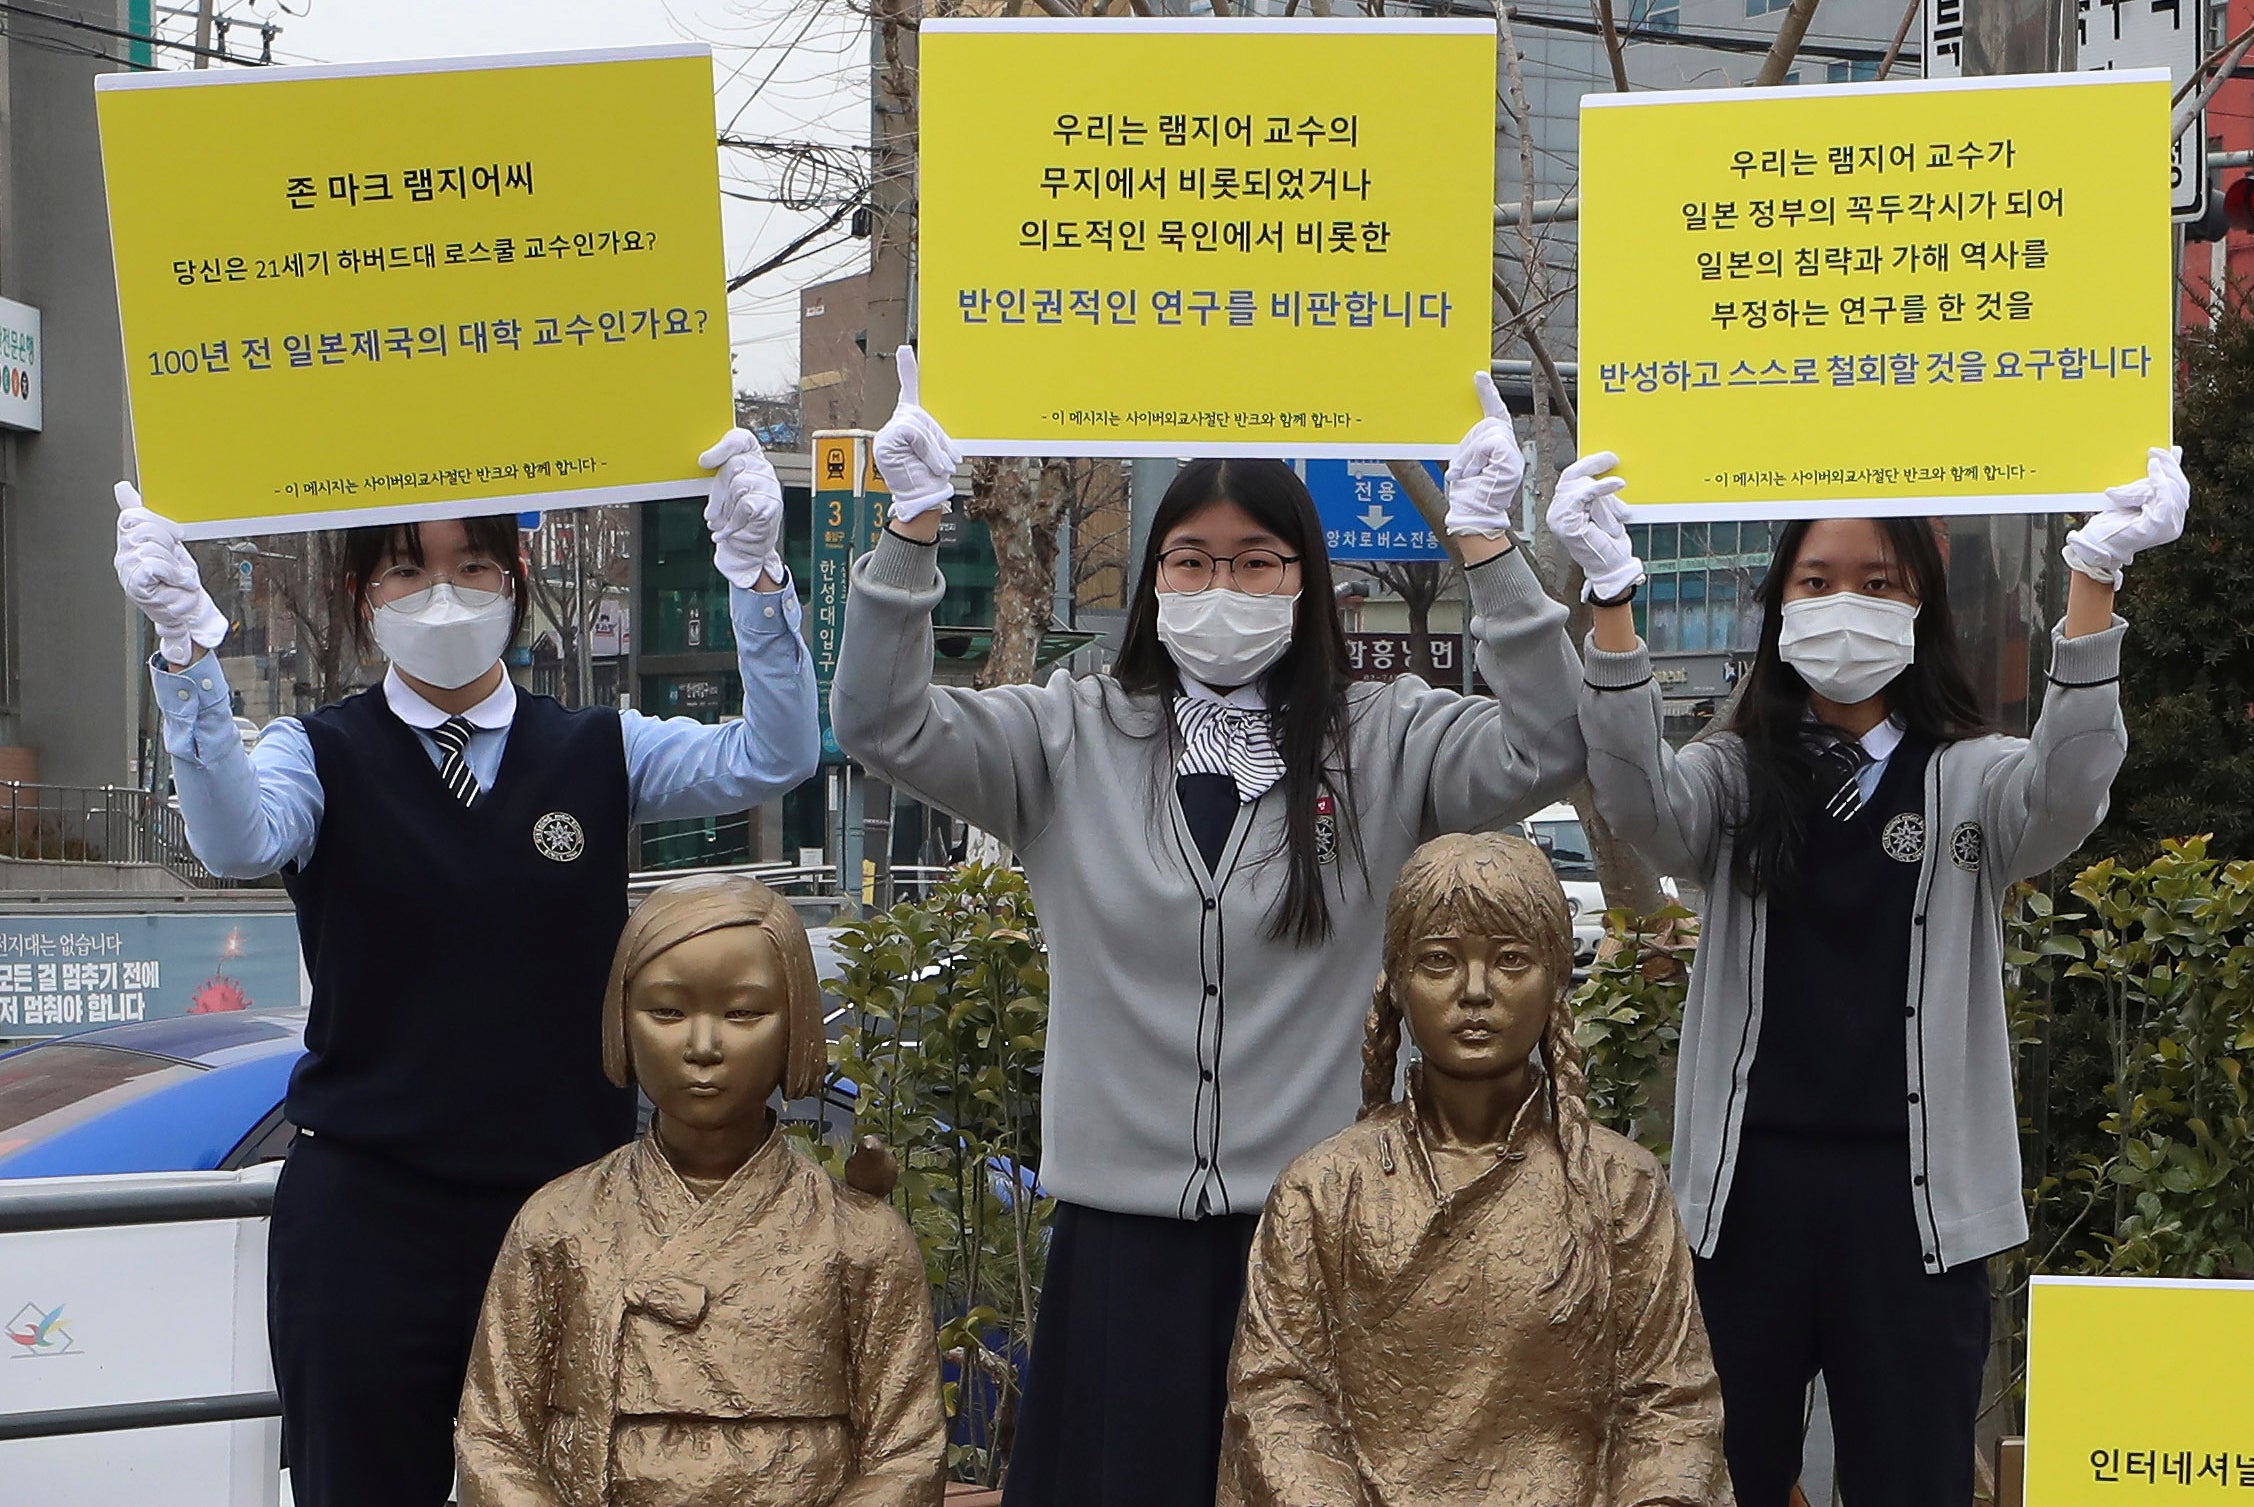 High school students hold up banners to protest a recent academic paper by Harvard University professor J Mark Ramseyer, behind statues symbolising wartime sex slaves in Seoul, South Korea